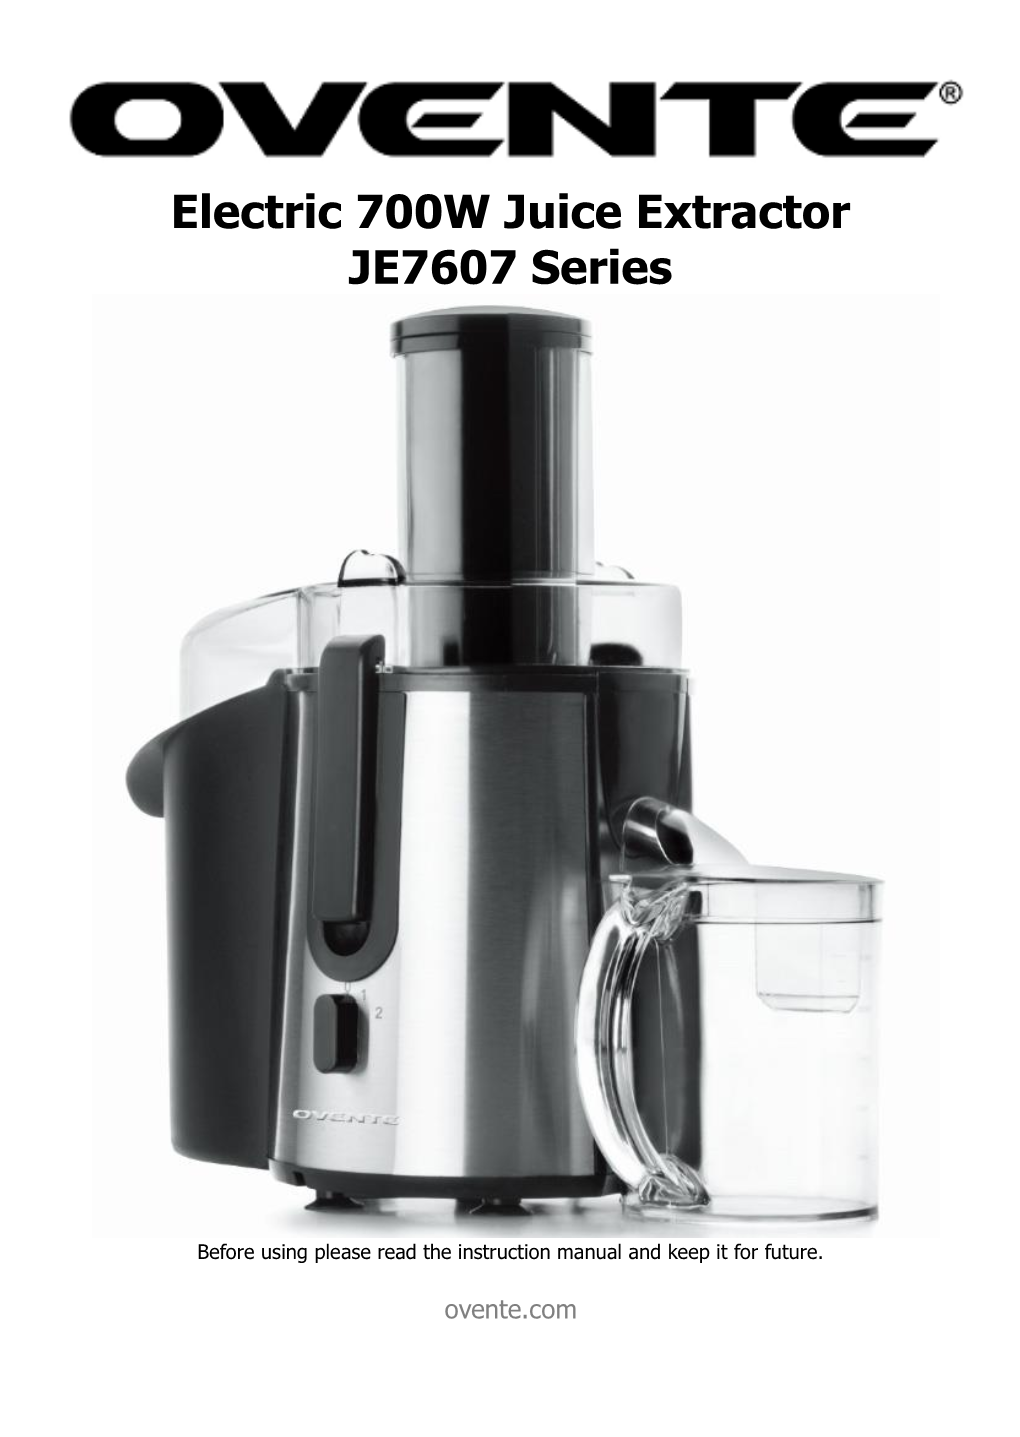 Je7607br Electric Juicer Extractor Instruction Manual